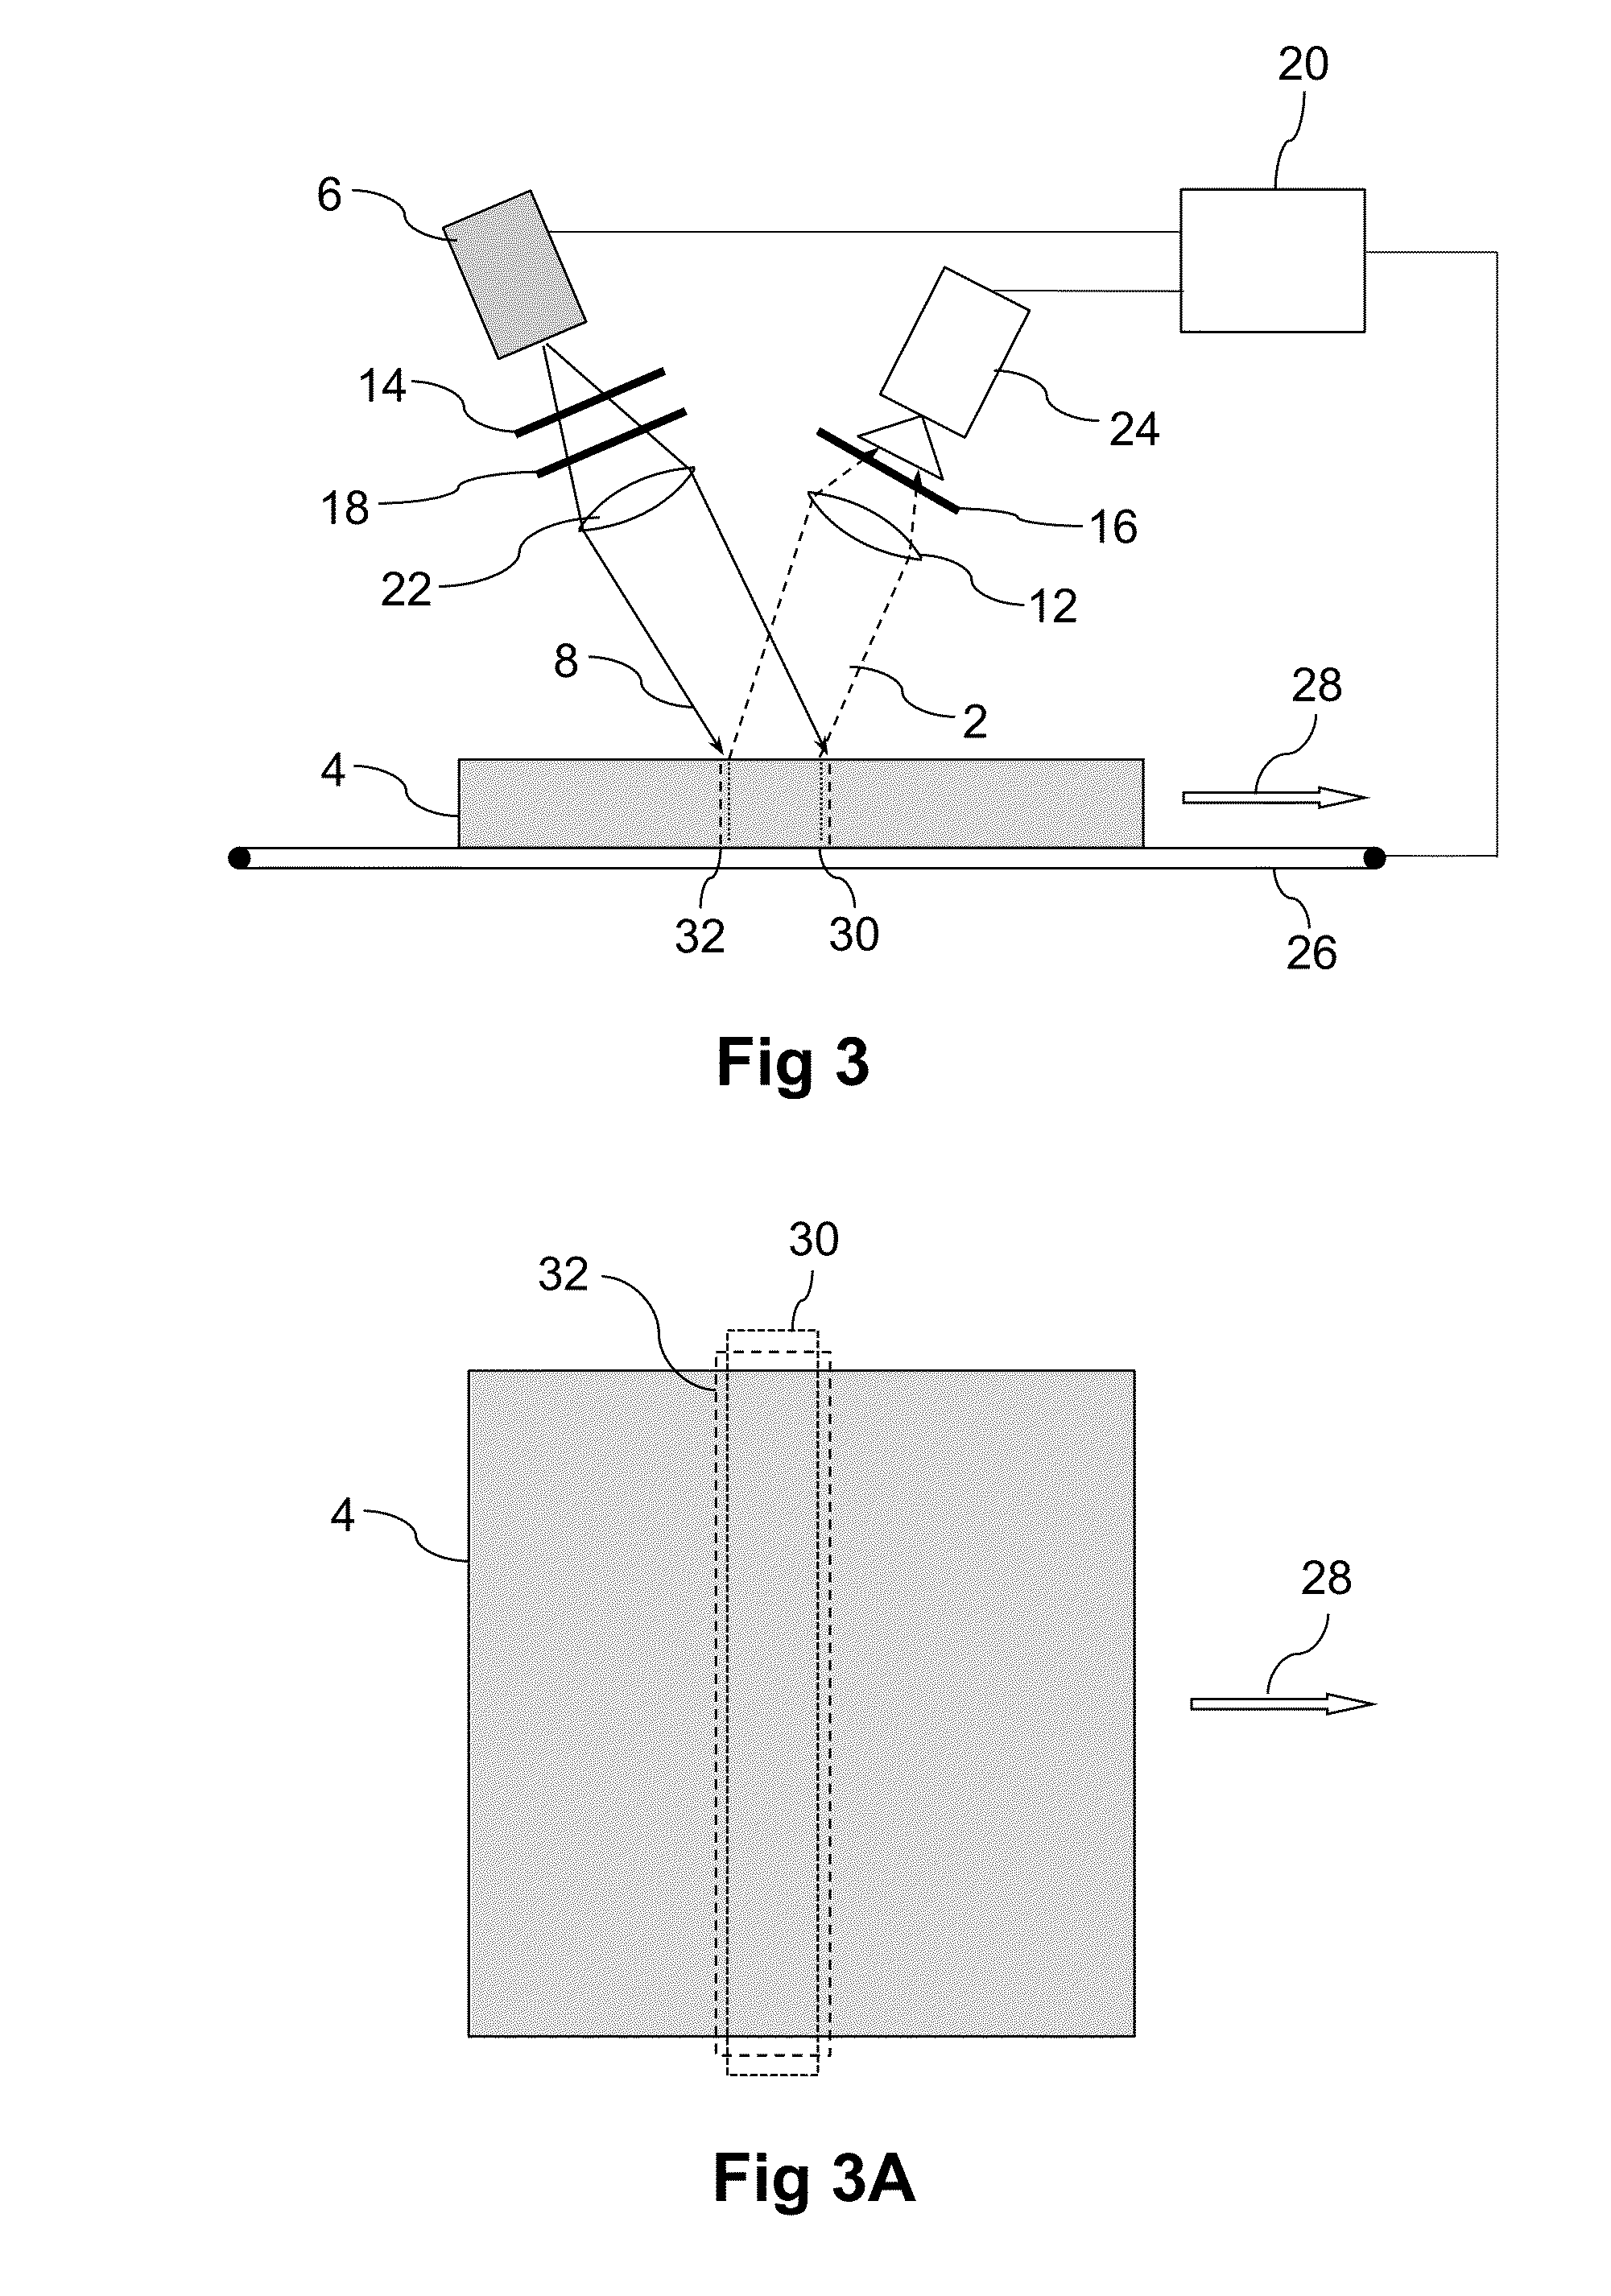 Methods for inspecting semiconductor wafers